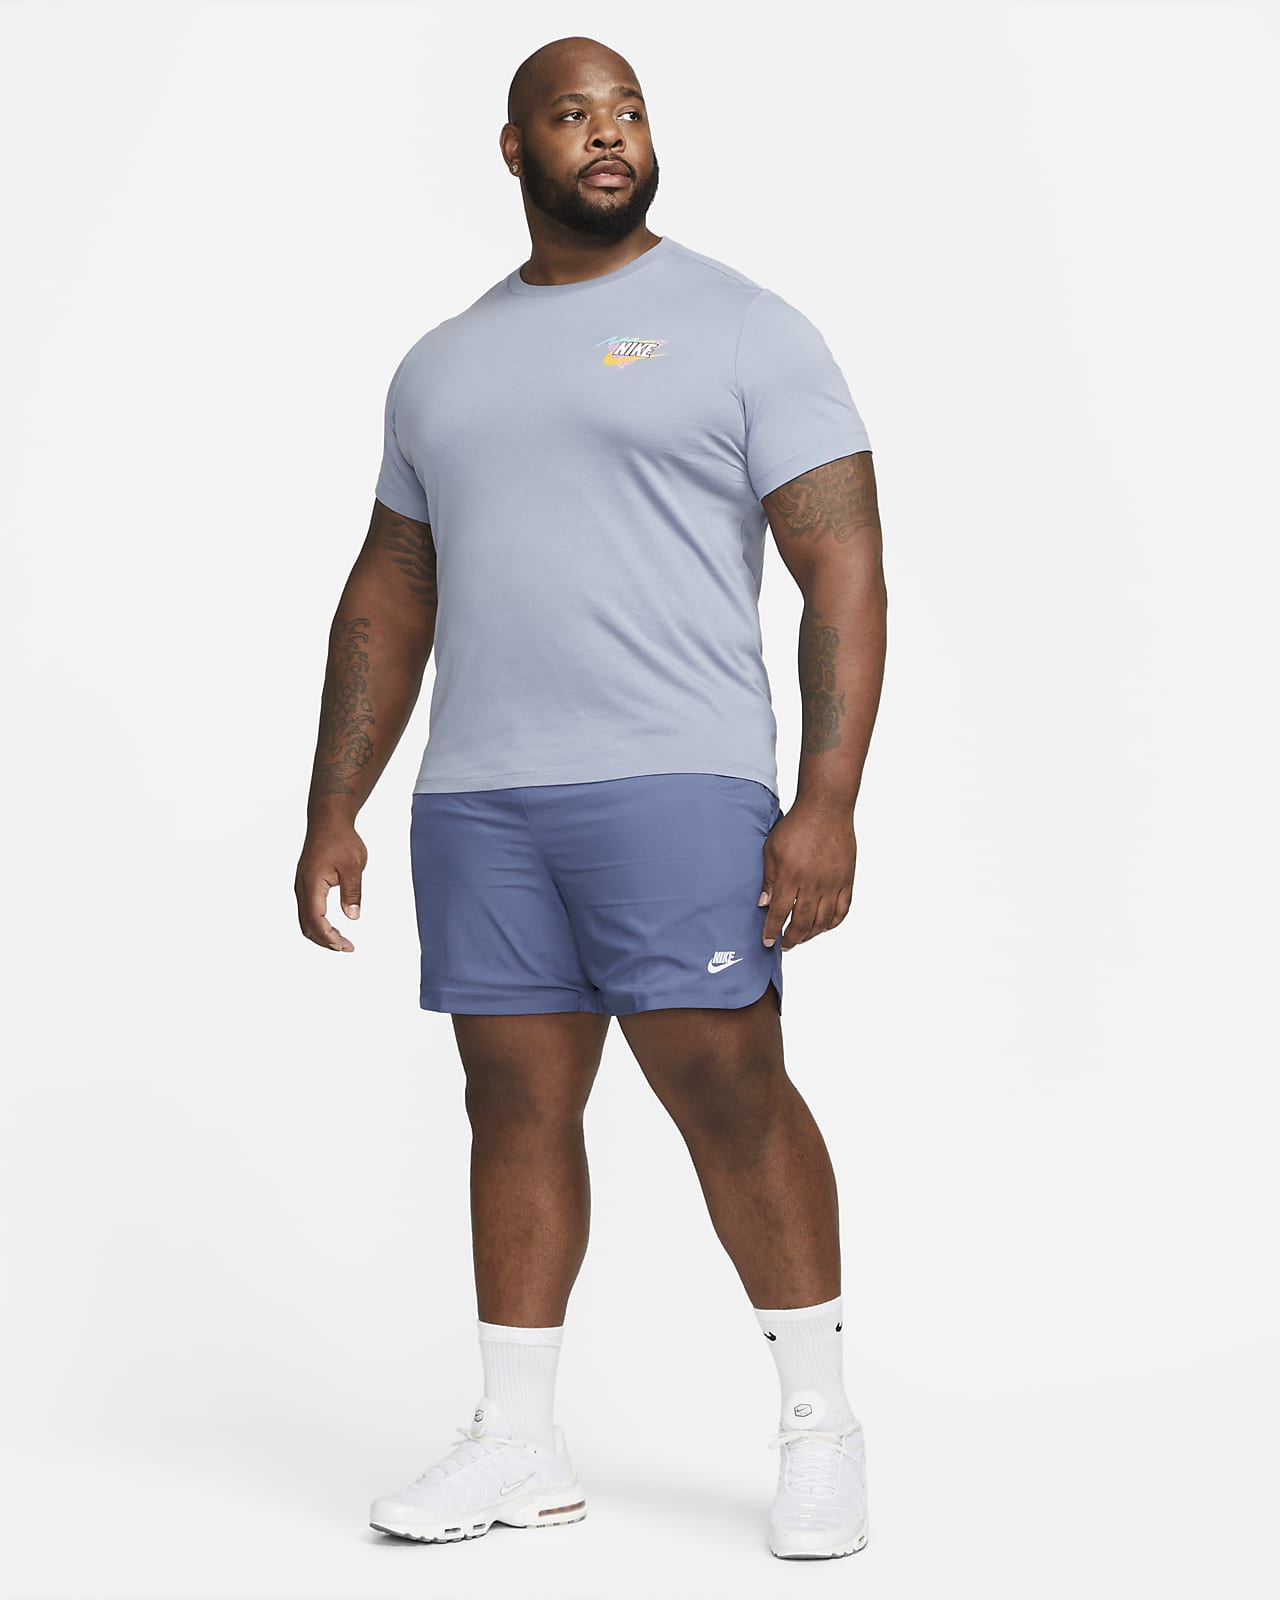 Under Armour, Men's Tracksuits, Shorts & T-Shirts